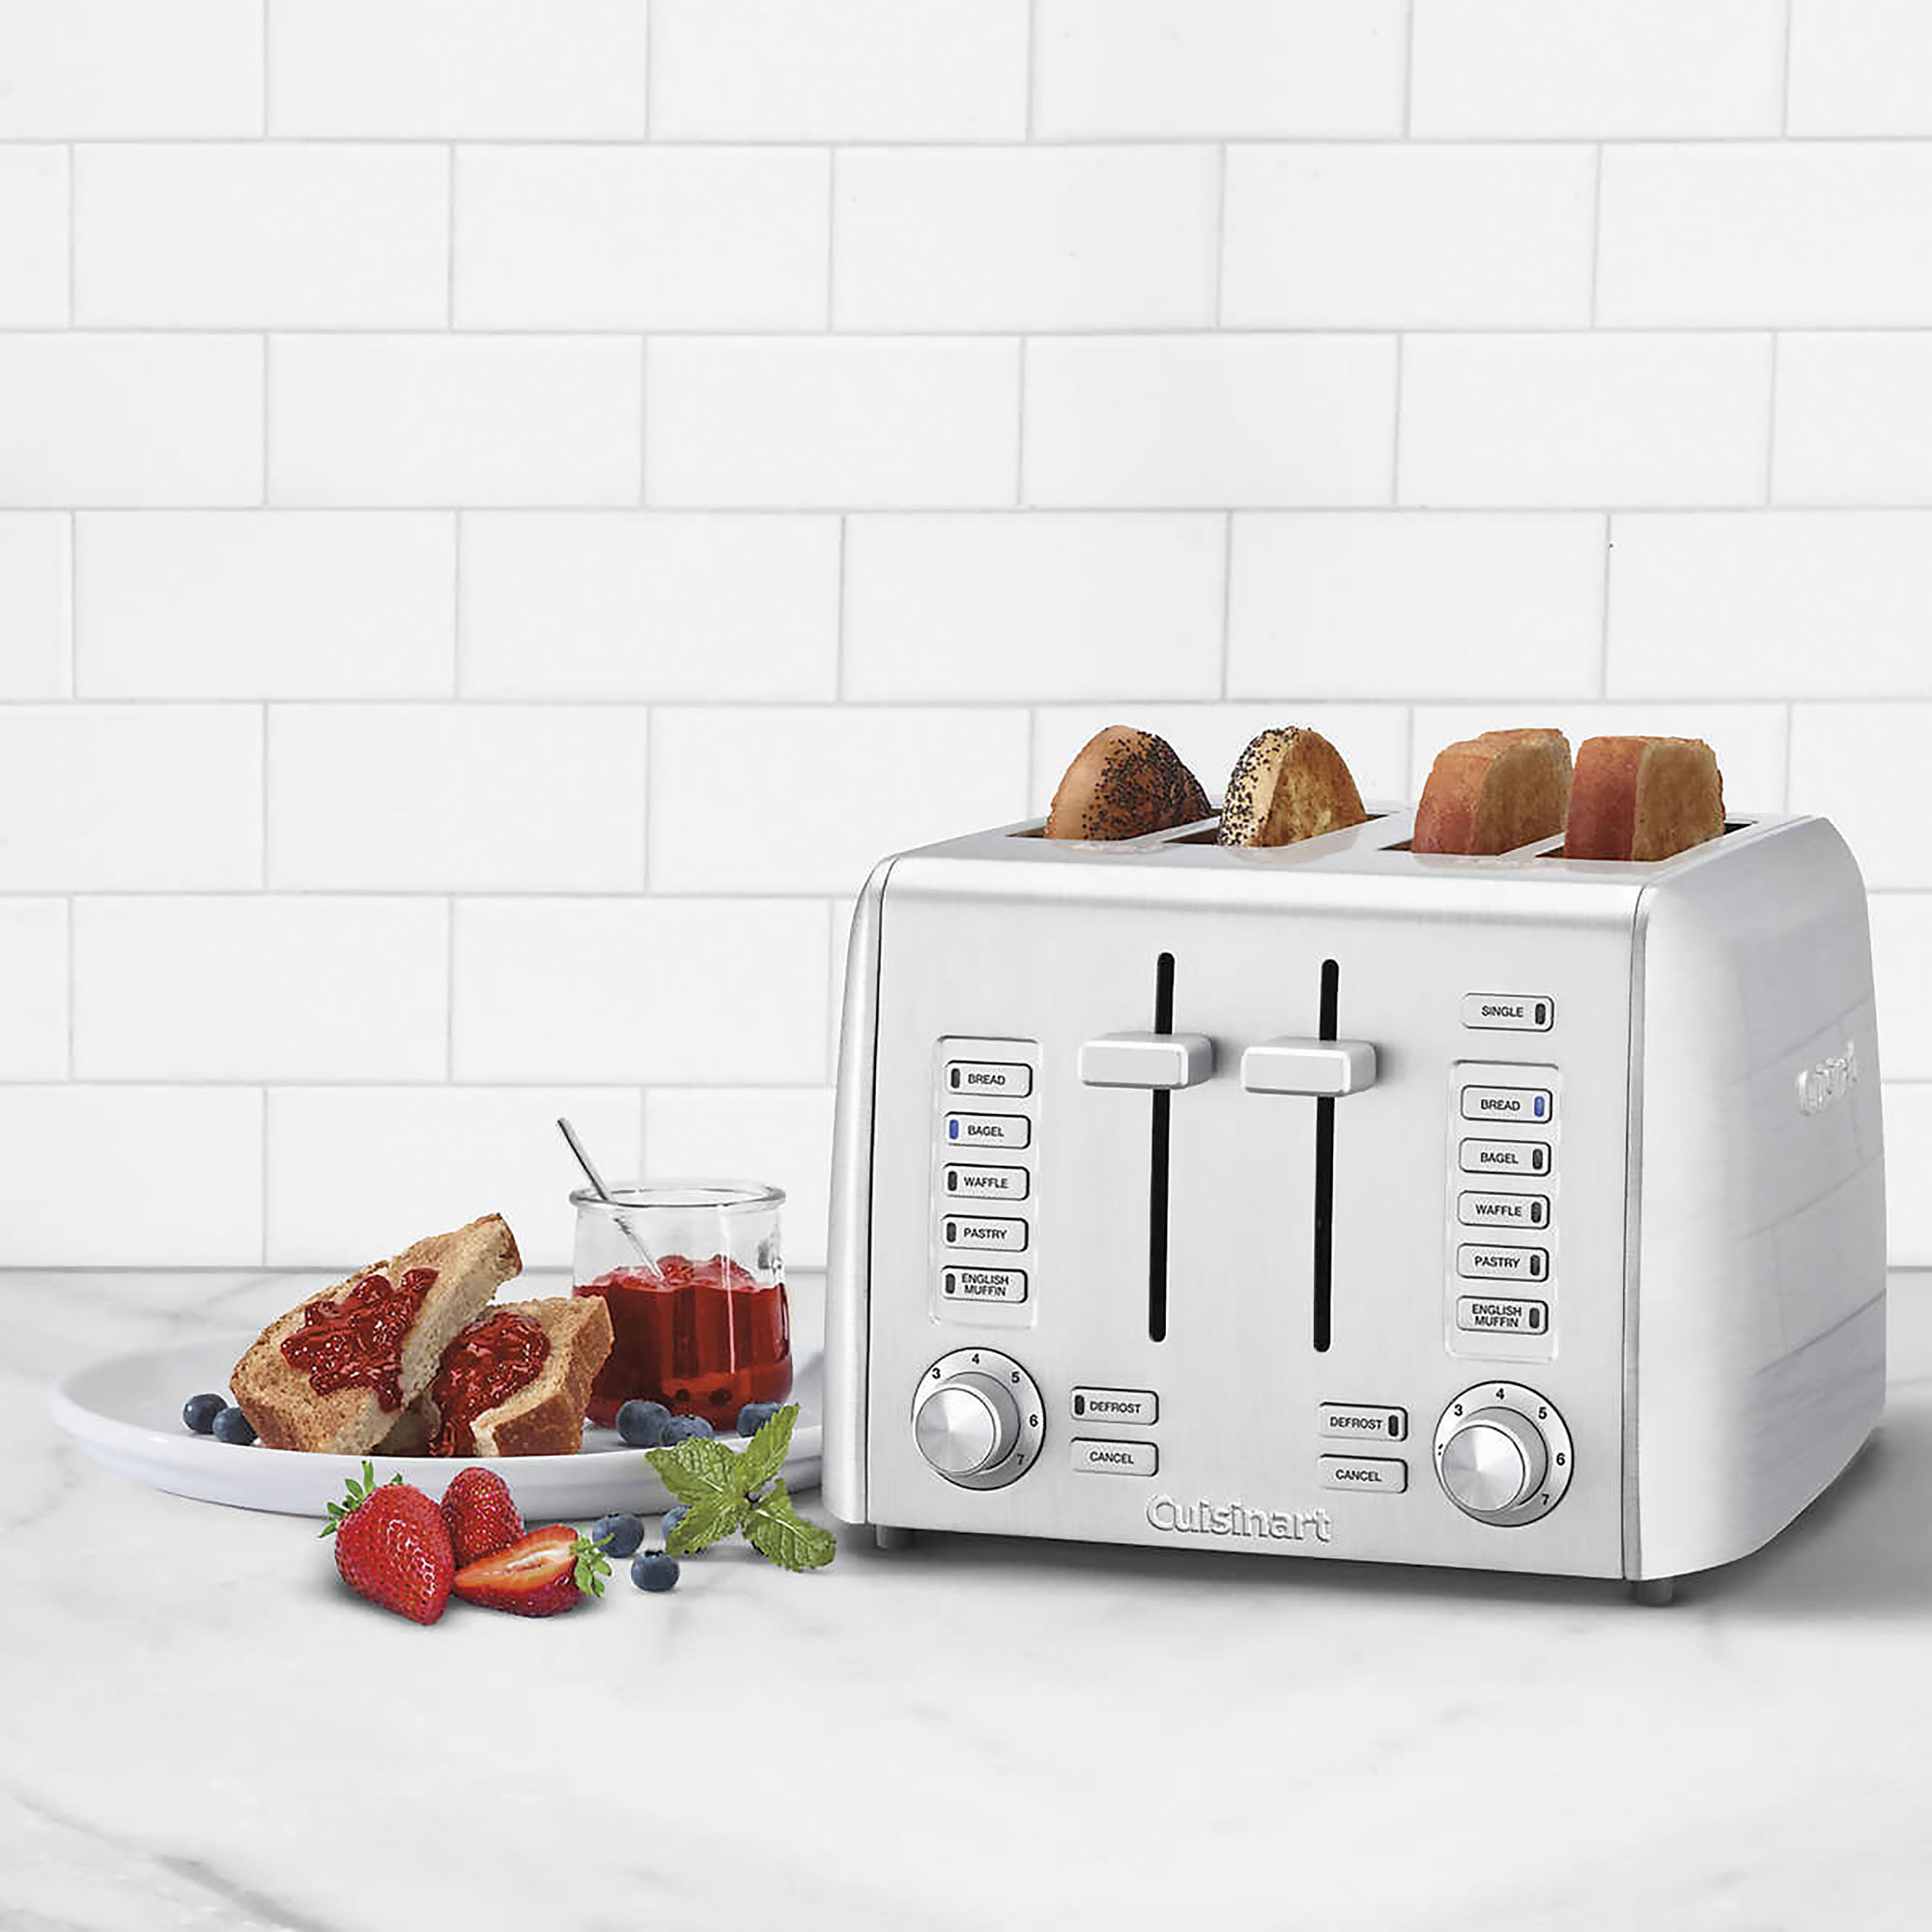 Cuisinart's 4-Slice Compact Toaster is on sale for $40 today